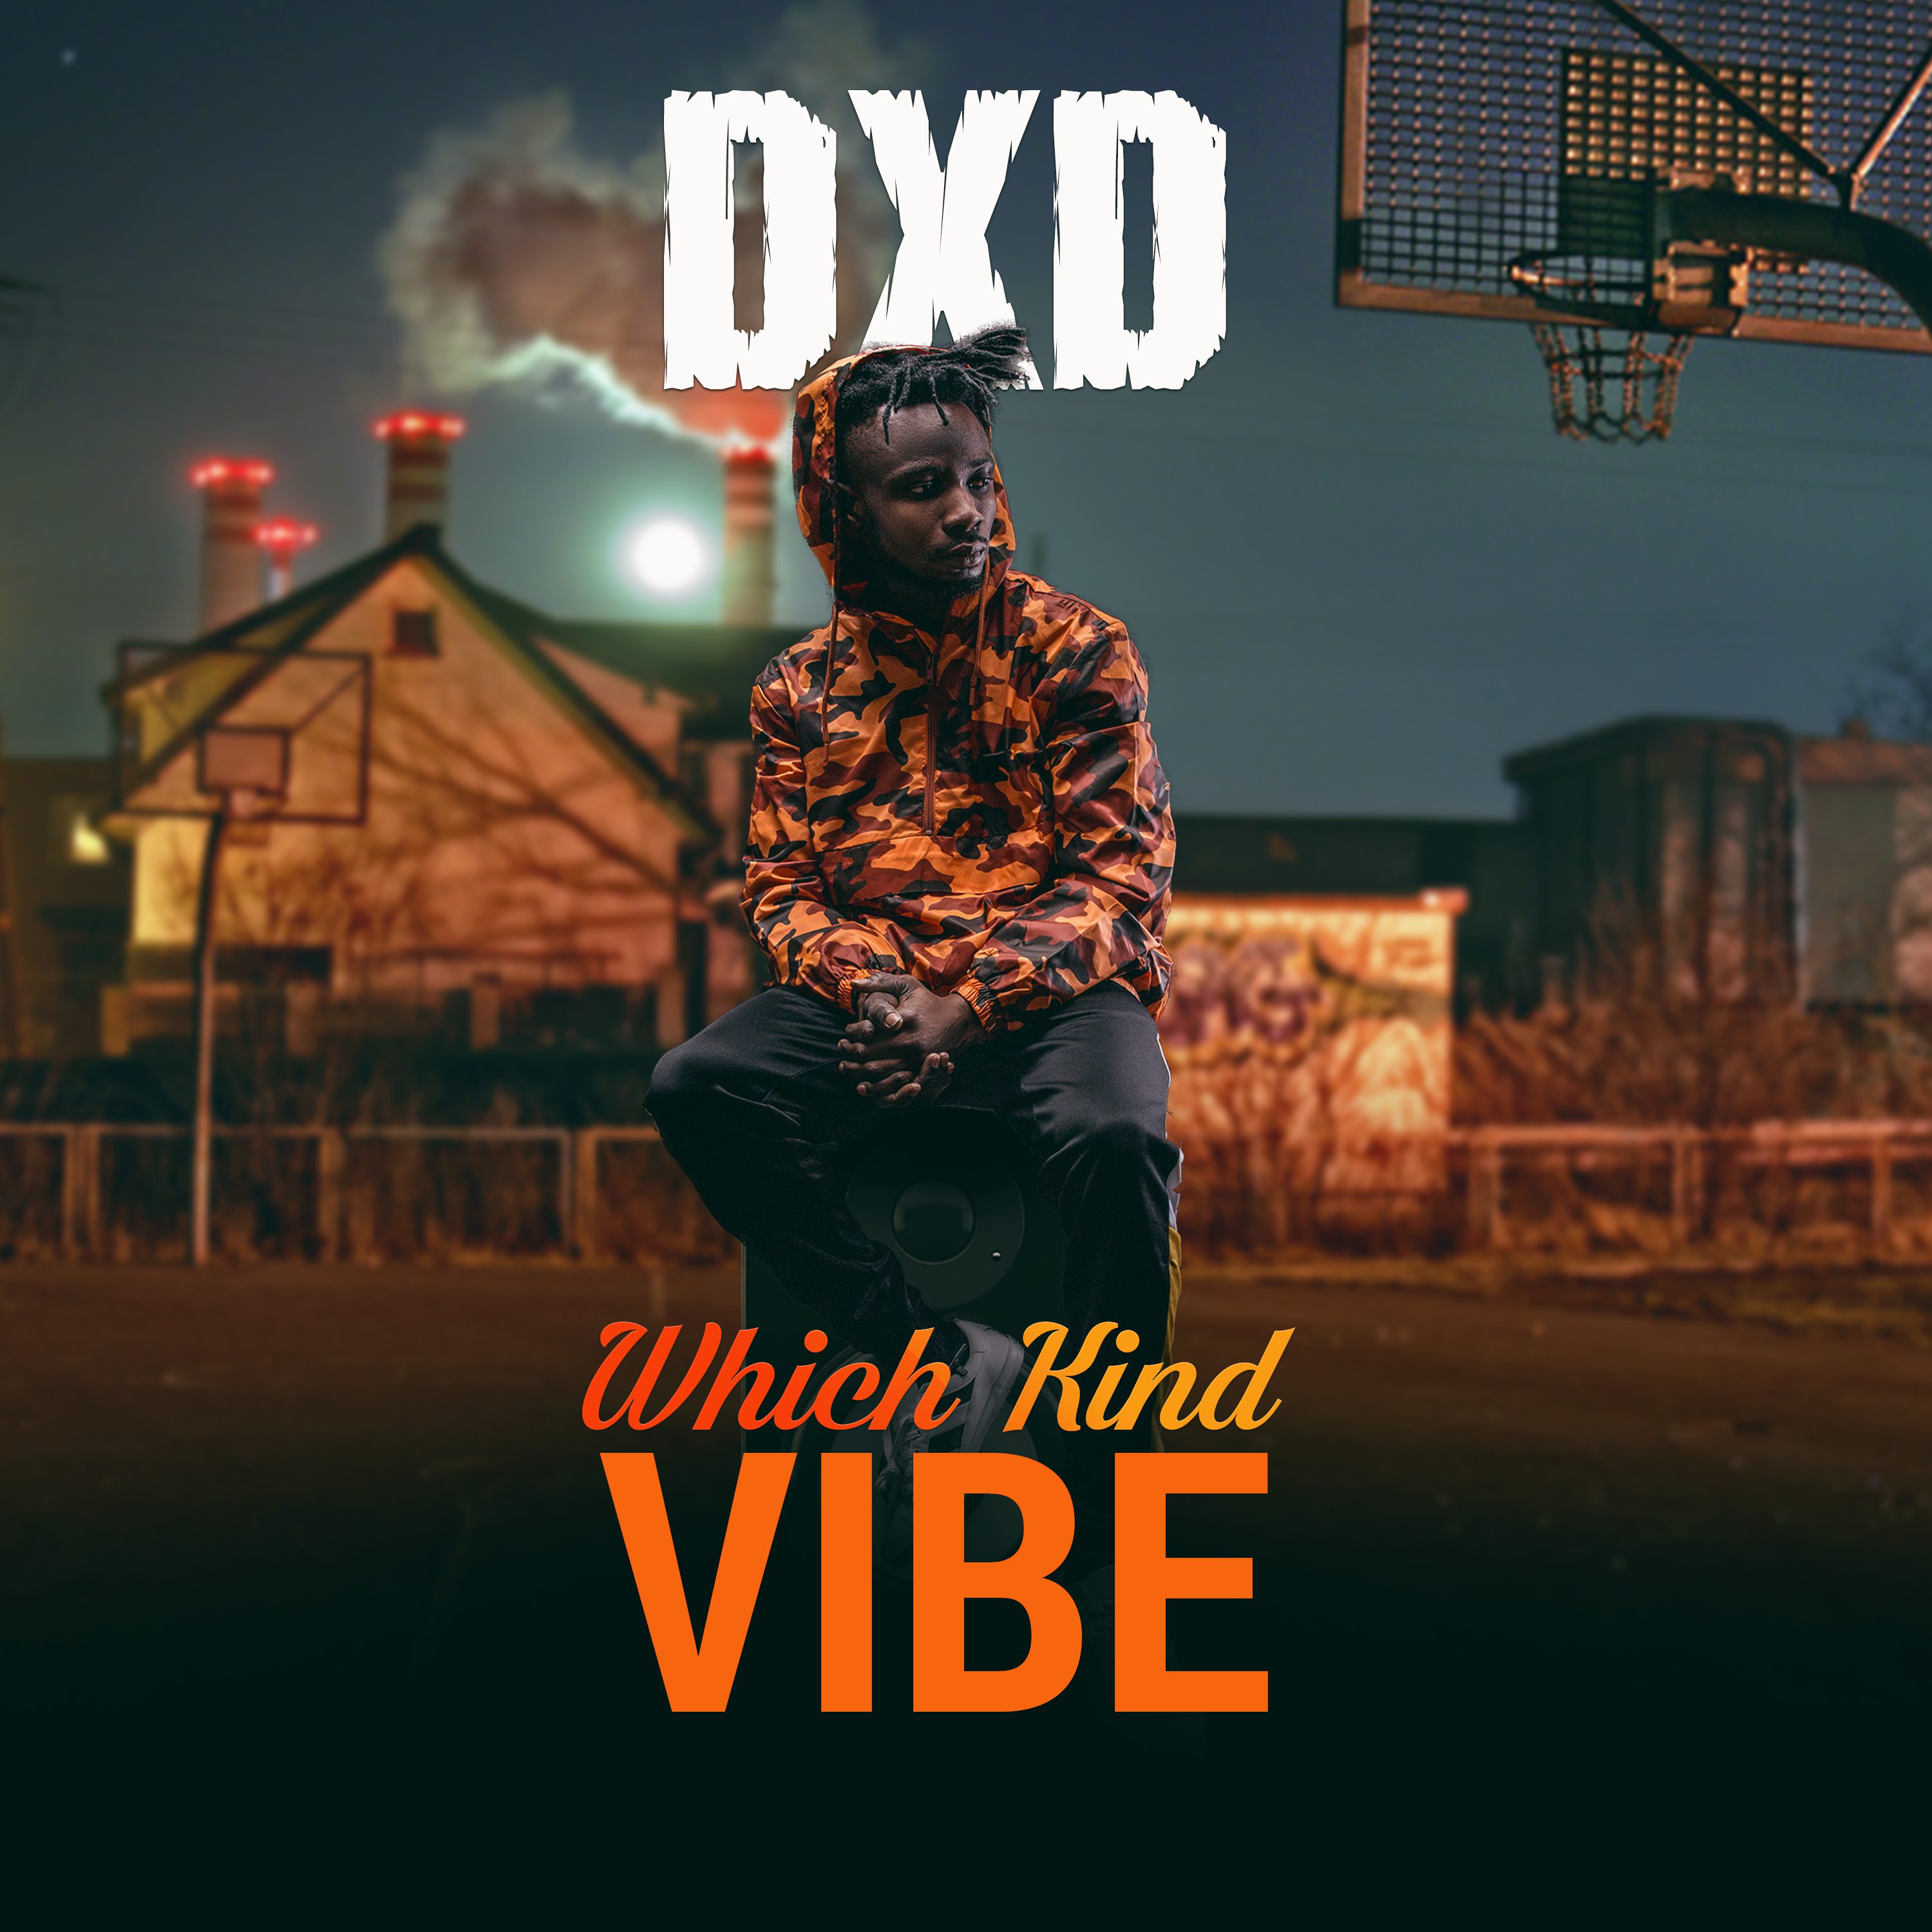 DXD Set To Release New Single ‘Which Kind Vibe’ On 1/8/2019.